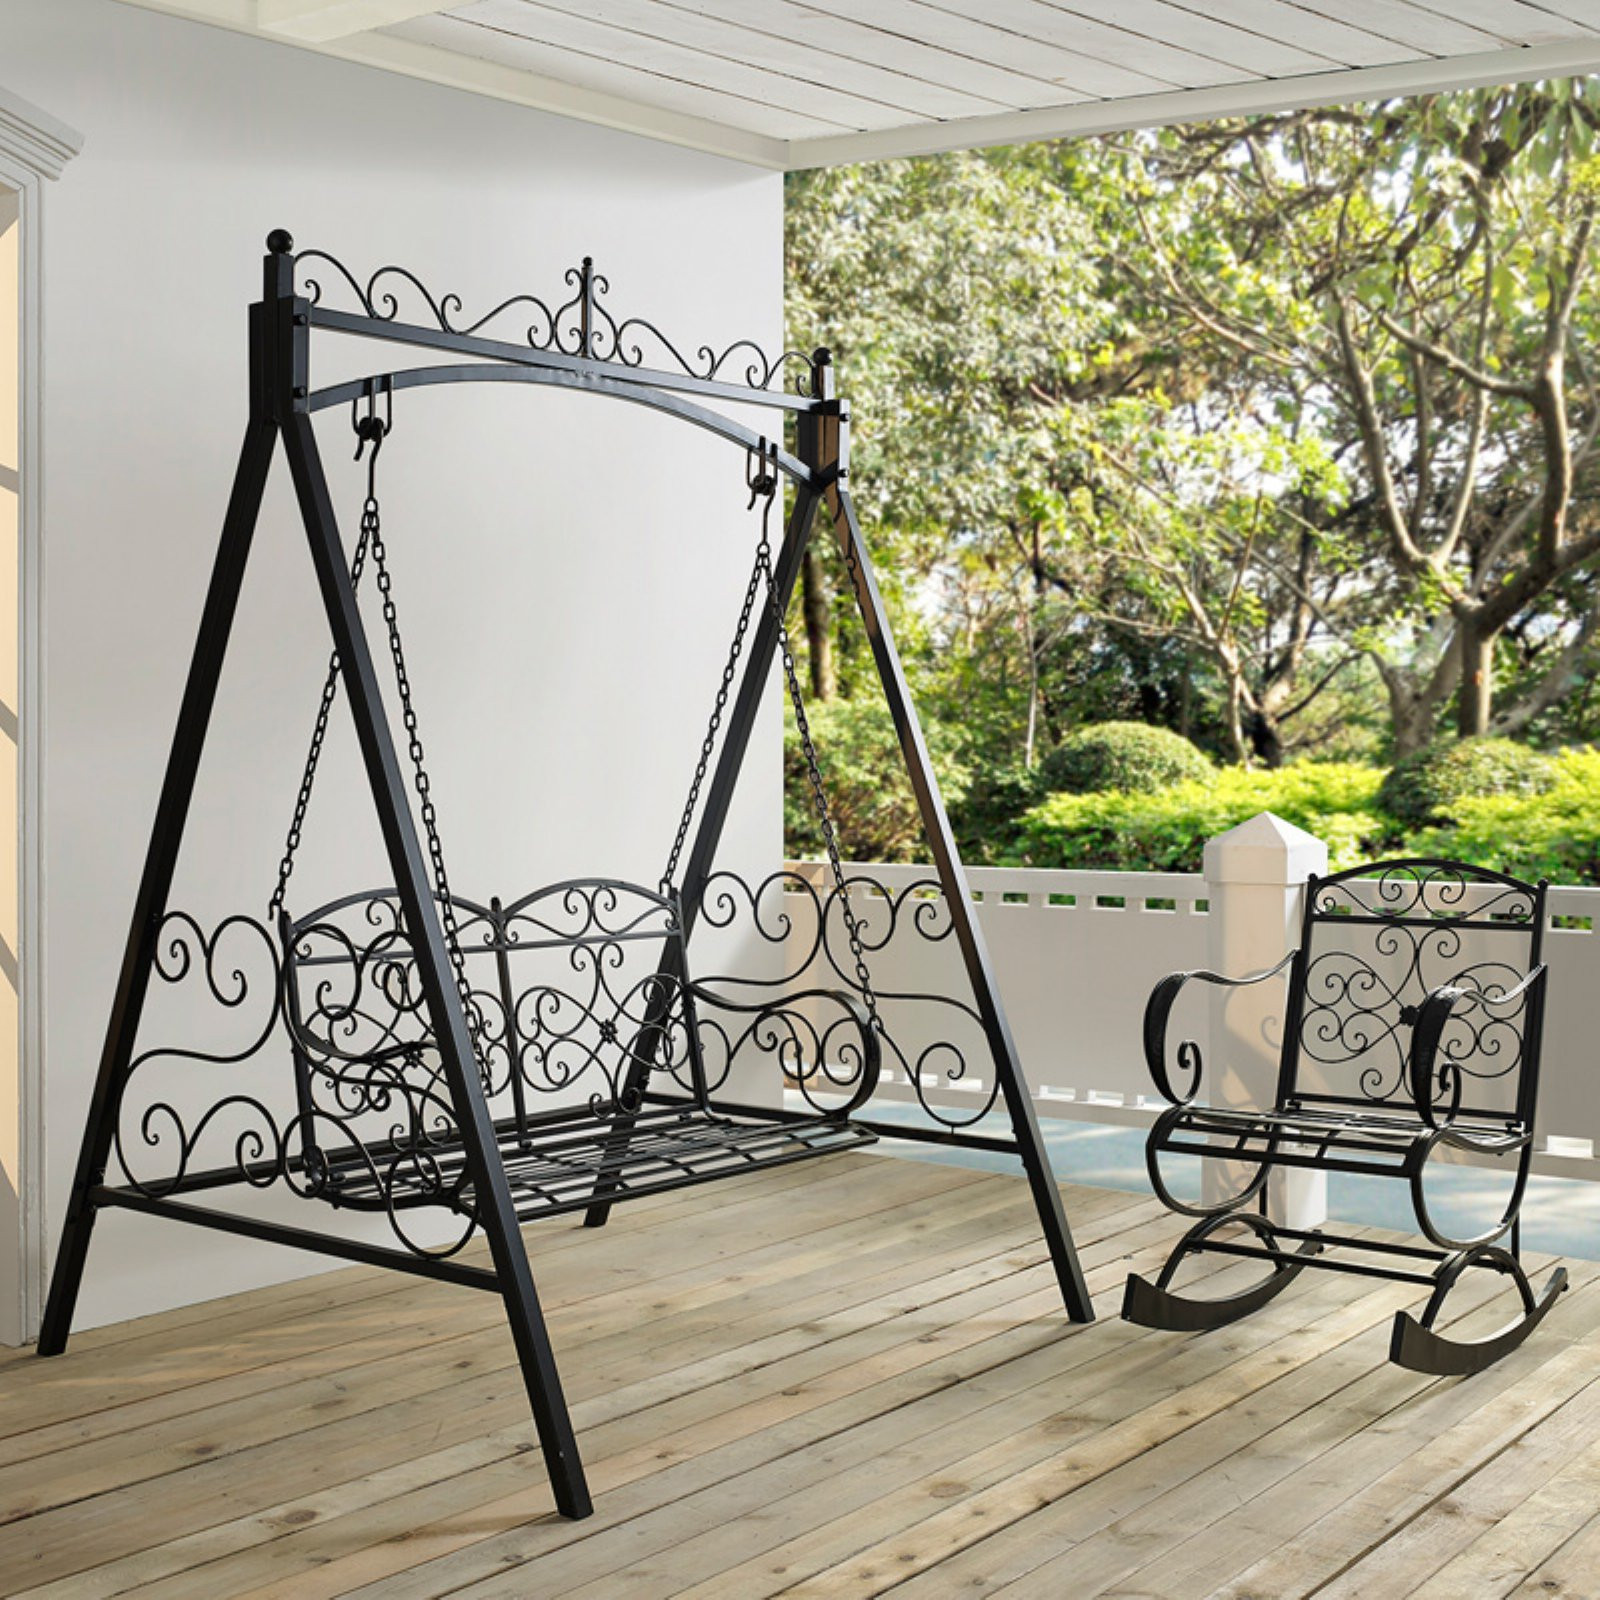 Best ideas about Outdoor Porch Swing
. Save or Pin Coral Coast Ridgecrest 4 ft Metal Outdoor Porch Swing and Now.